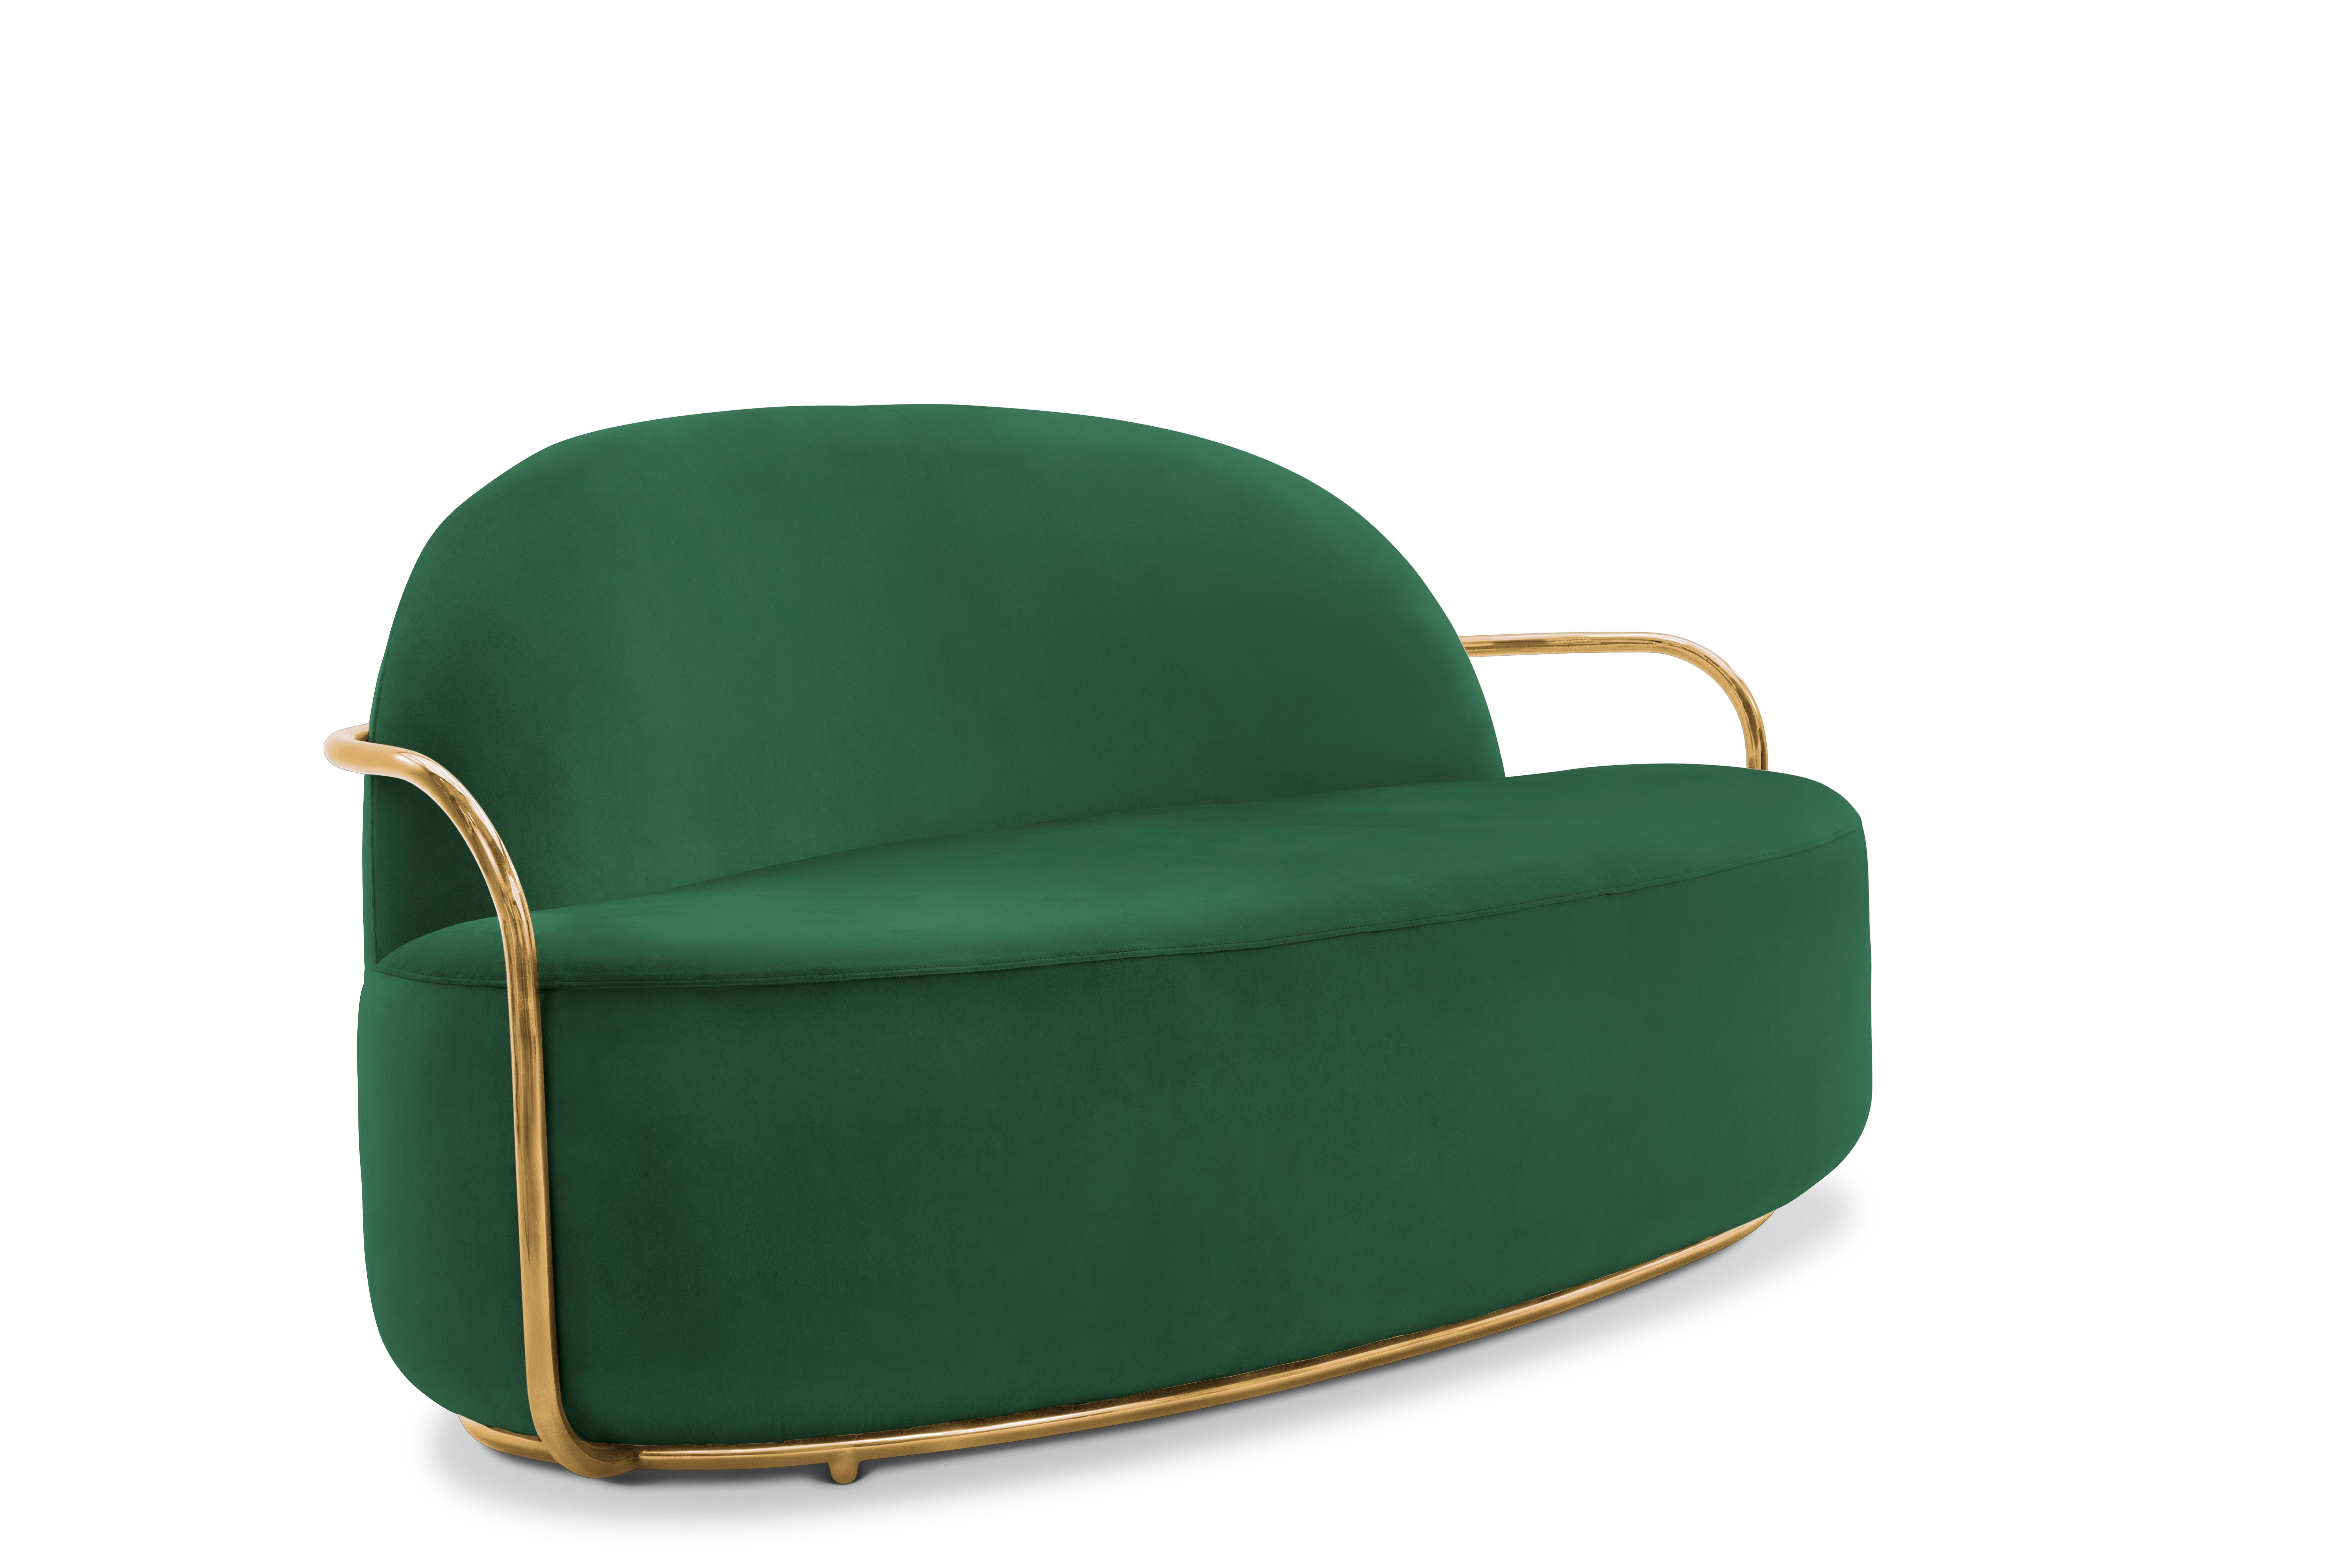 The rich deep green velvet contrasted with gold metal arms accentuates the fluid lines of the Orion 3 Seat Sofa with Plush Green Velvet and Gold Arms by Nika Zupanc

Nika Zupanc, a strikingly renowned Slovenian designer, never shies away from